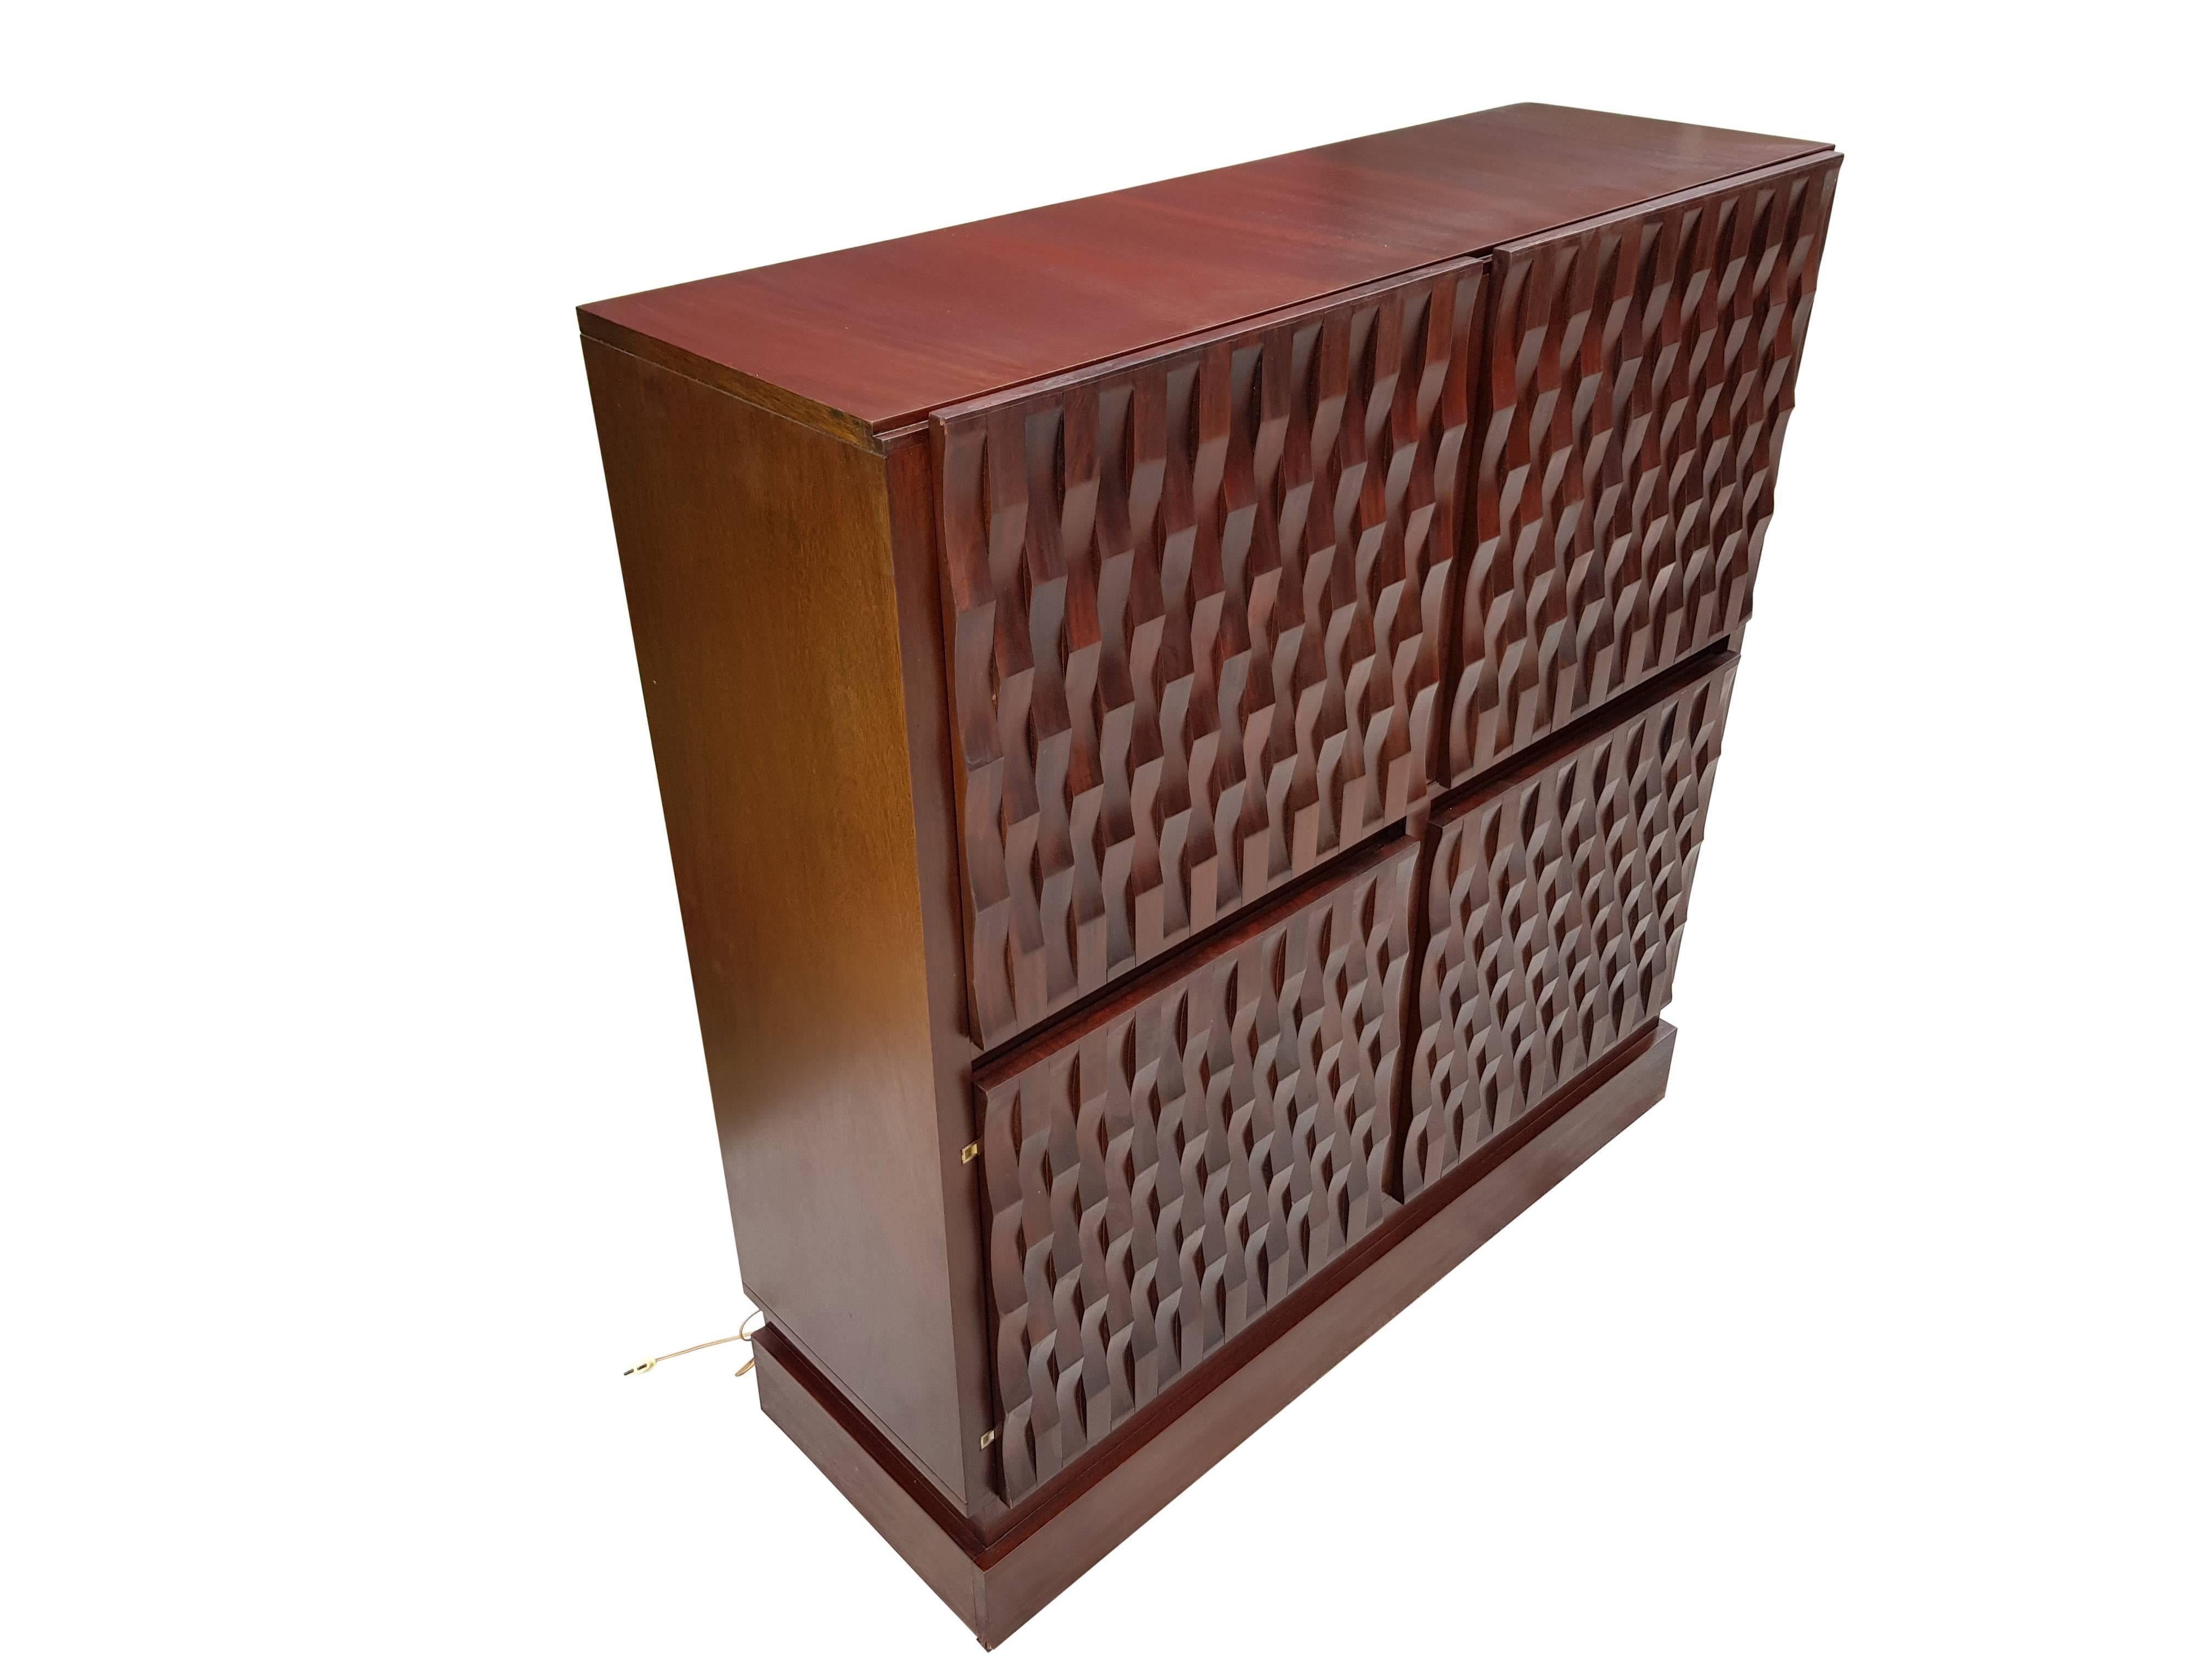 Very rare Mahogany bar cabinet from Musterring.
The bar has exceptionaly 3 dimensional grafphics, wich gaves a very modernistic touch on the doors.
The bar is labled with the maker.
This piece is very good matching with interiors like, Willy